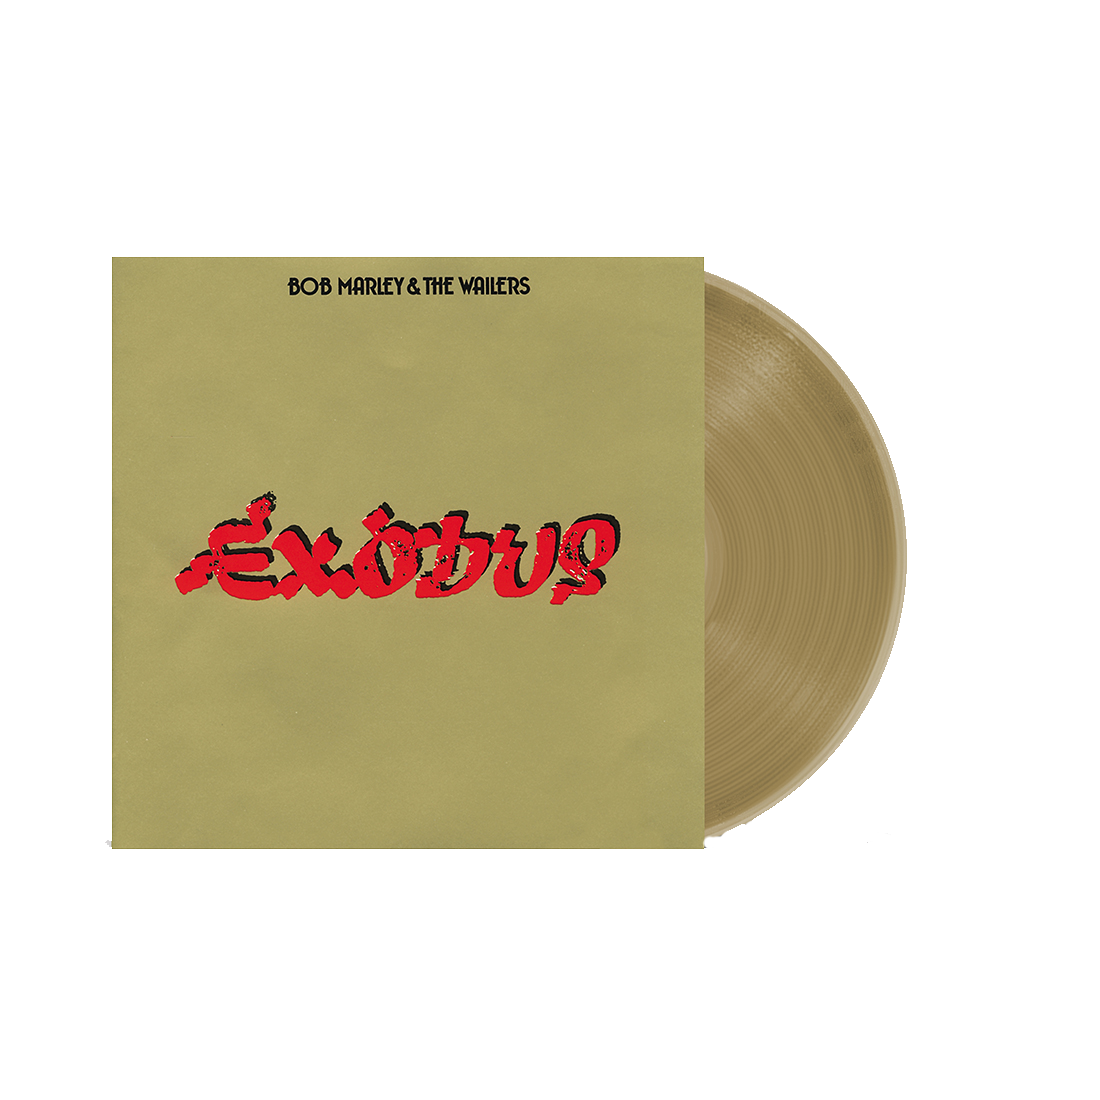 Bob Marley and The Wailers - Exodus: Exclusive Gold Vinyl LP